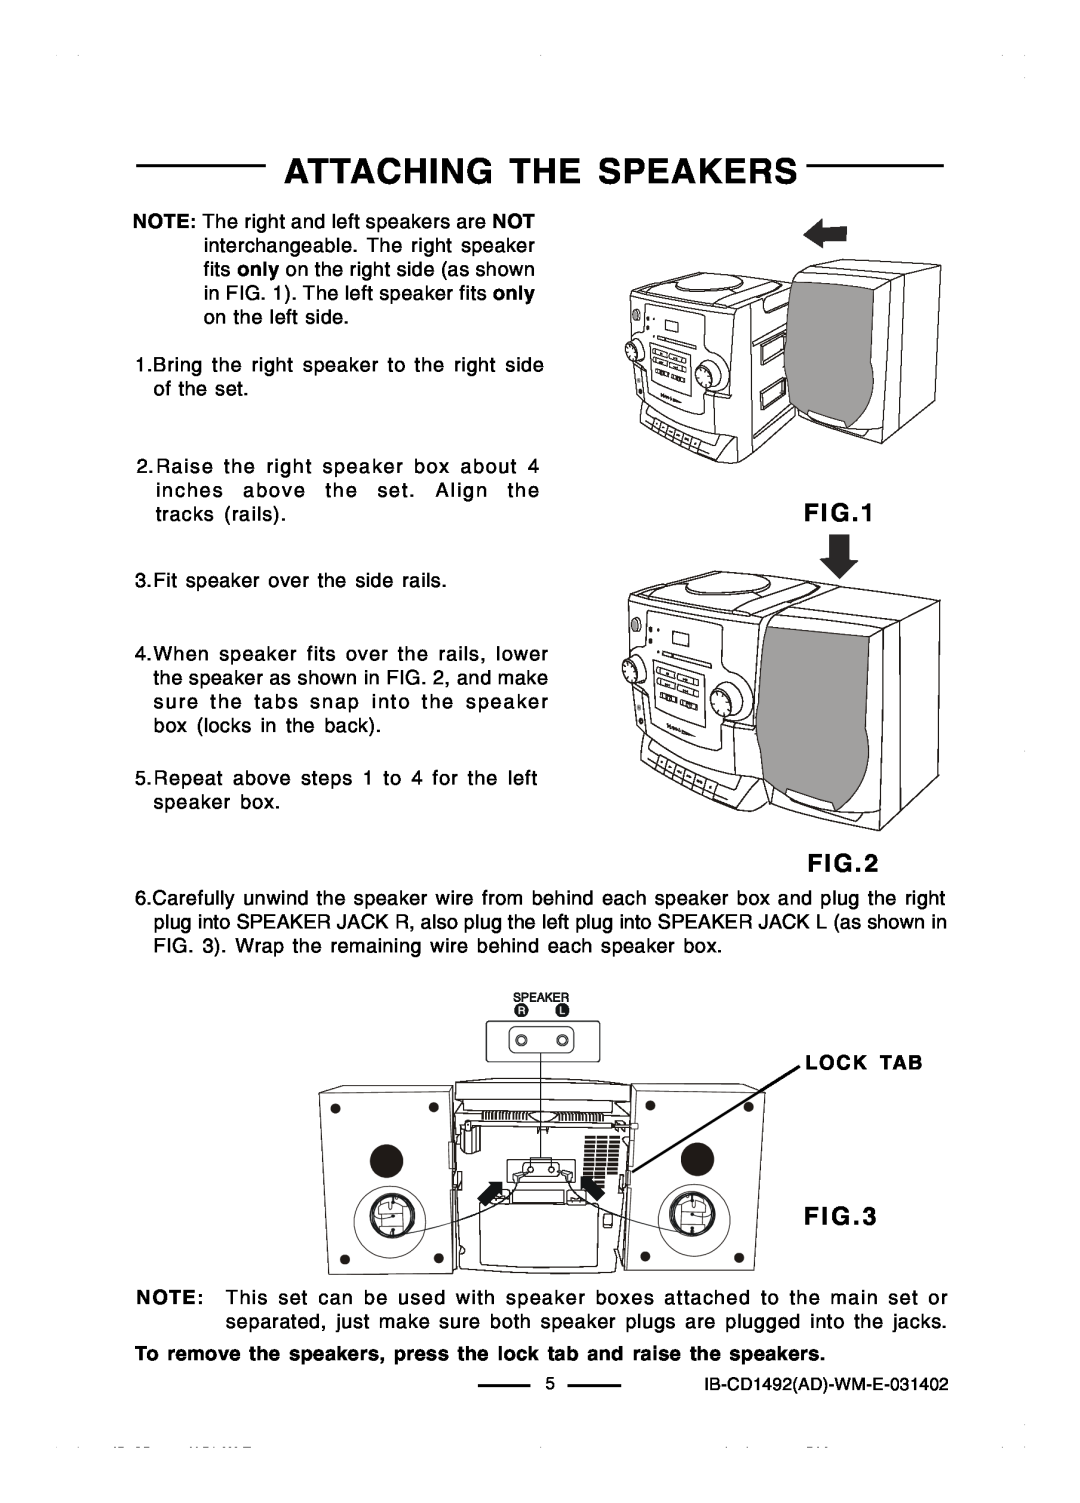 Lenoxx Electronics CD-1492 operating instructions Attaching The Speakers 